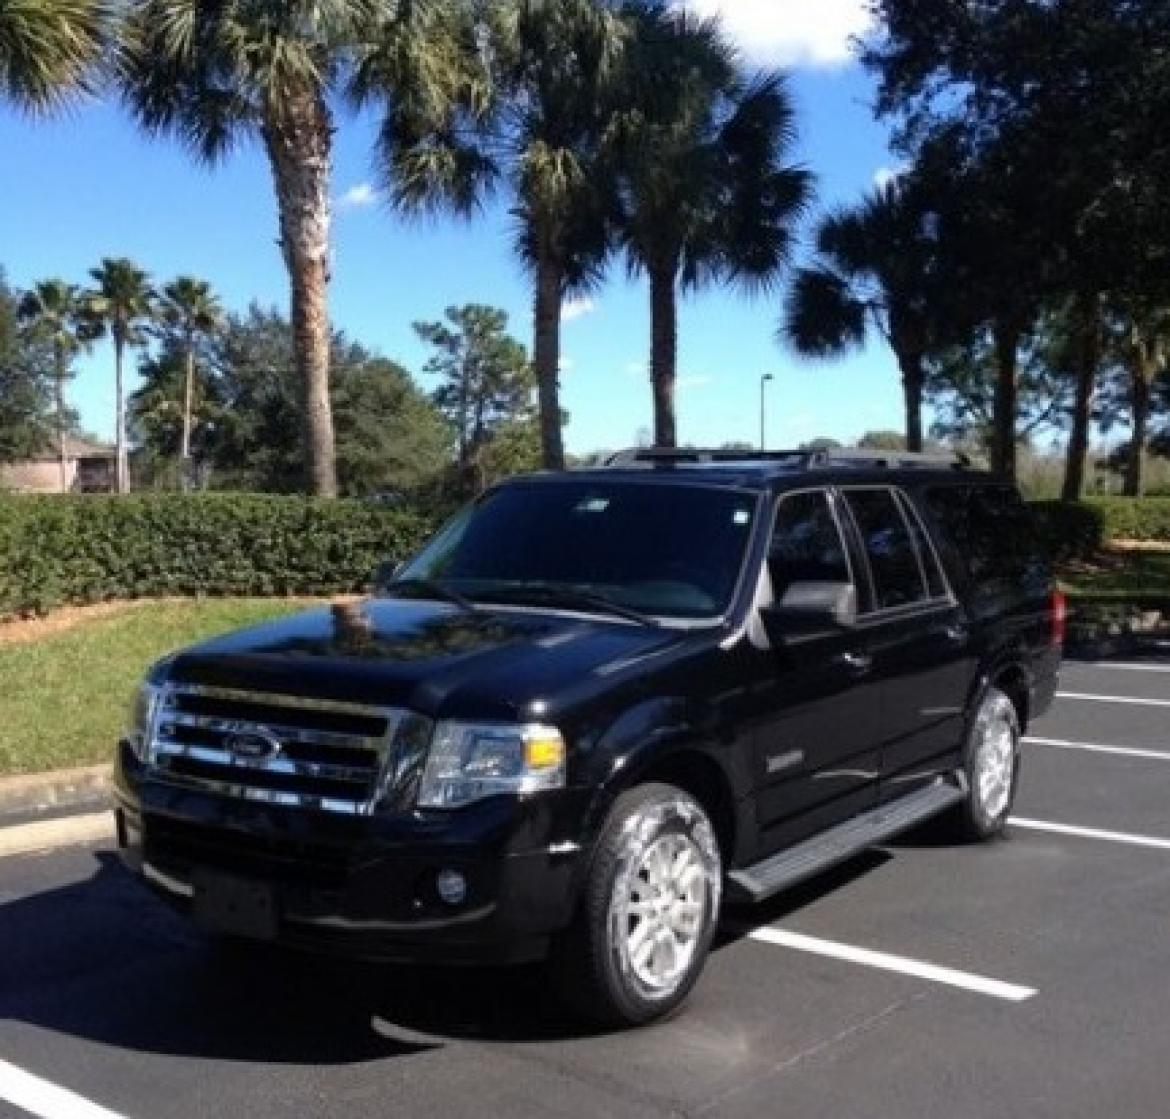 SUV for sale: 2008 Ford Expedition EL VIP by DaBryan